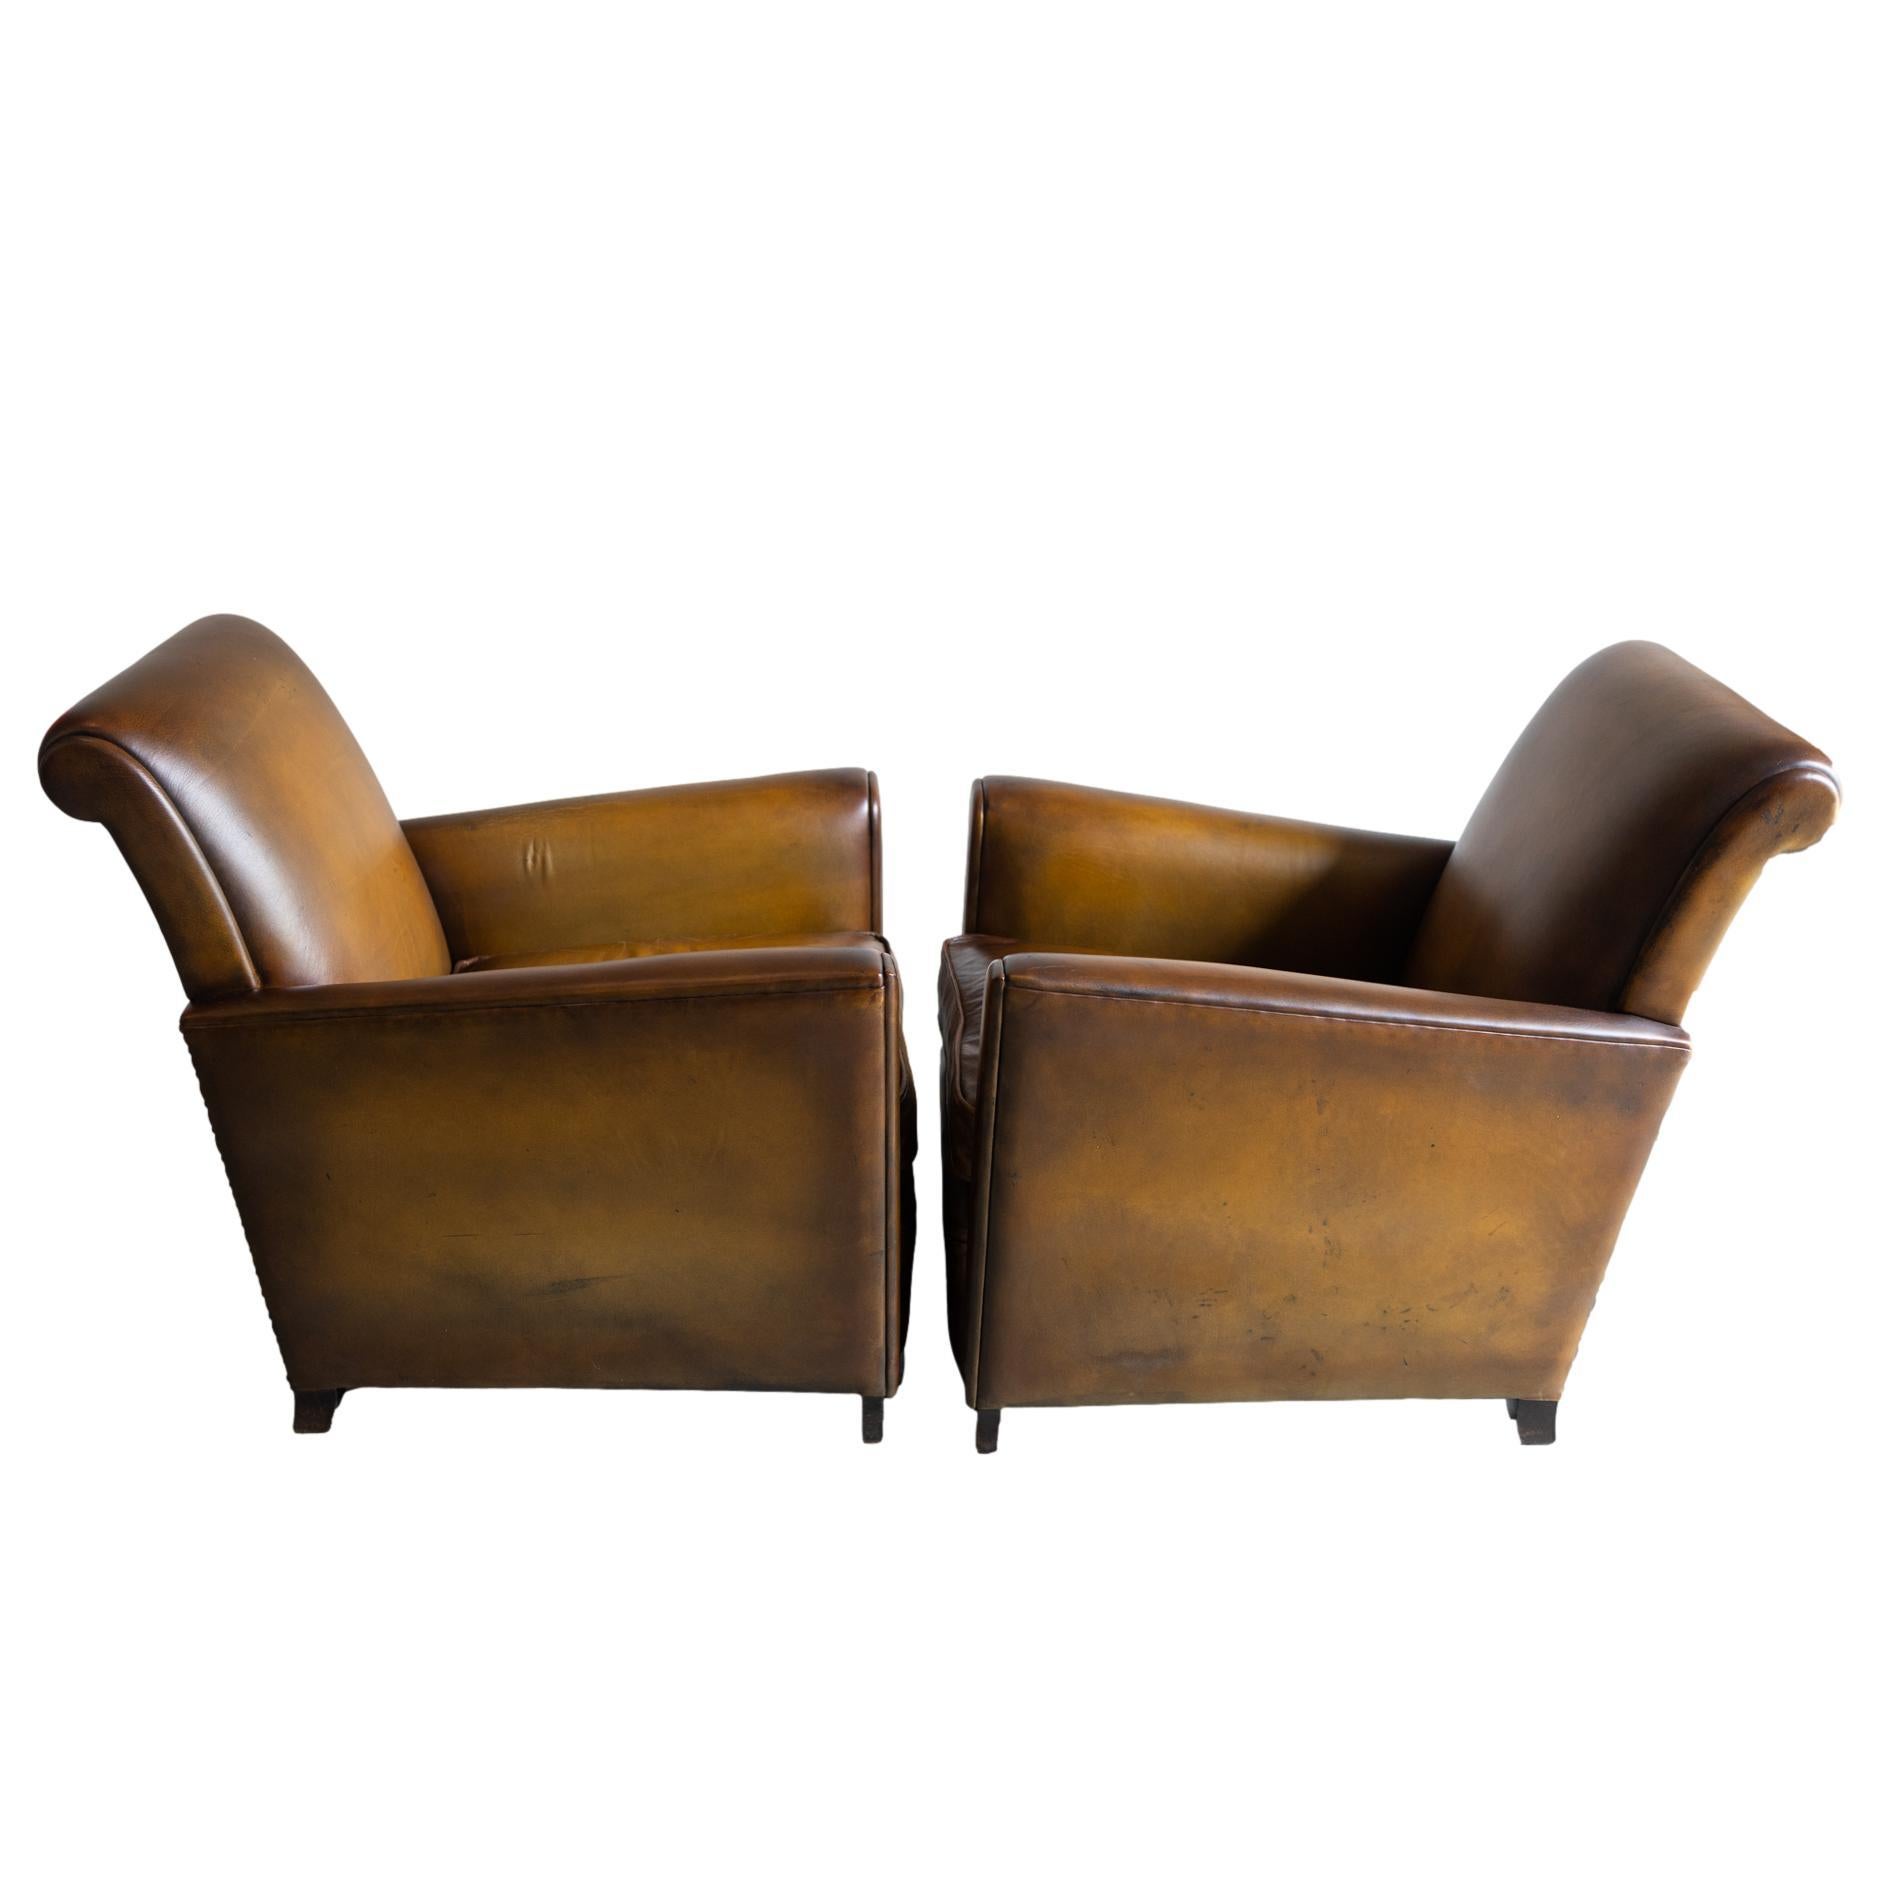 A Pair of Art Deco Leather Club Chairs, French, ca. 1935 For Sale 3